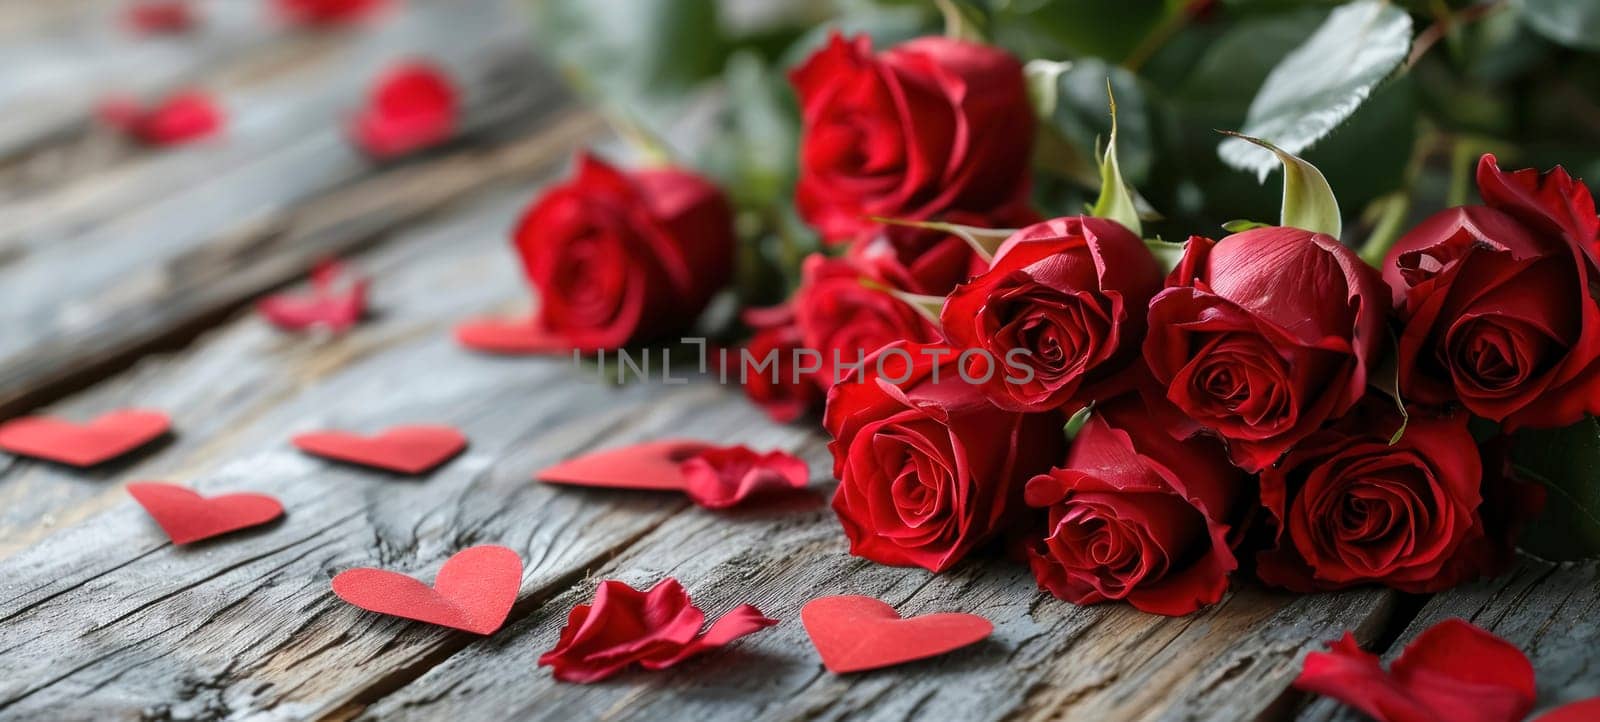 Roses and hearts on wooden board, Valentine's Day background, wedding day by andreyz